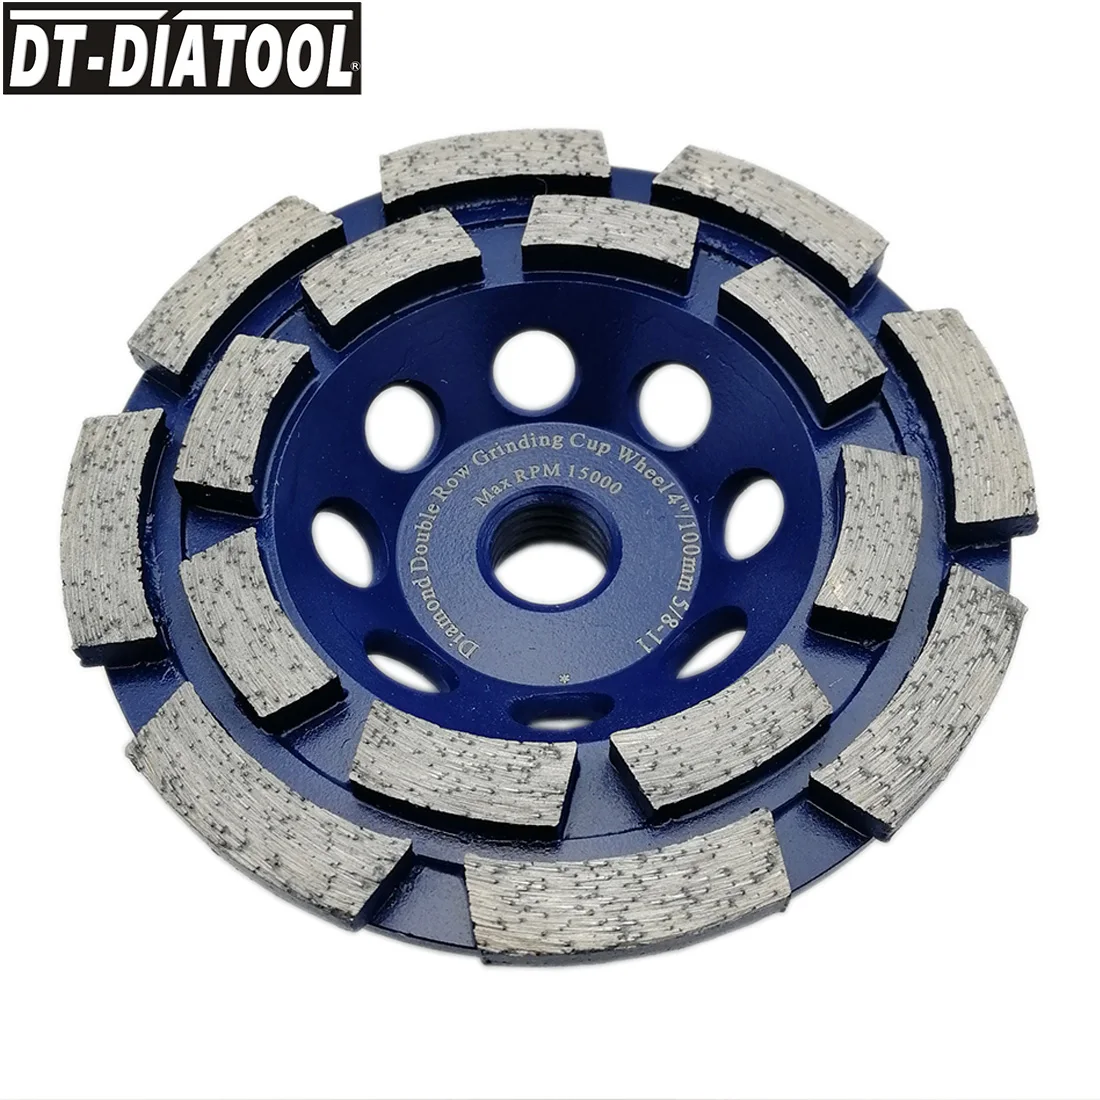 

DT-DIATOOL 1unit 4inch/100mm Diamond Double Row Cup Grinding Wheel for Concrete Brick Hard Stone Granite Marble 5/8-11 thread